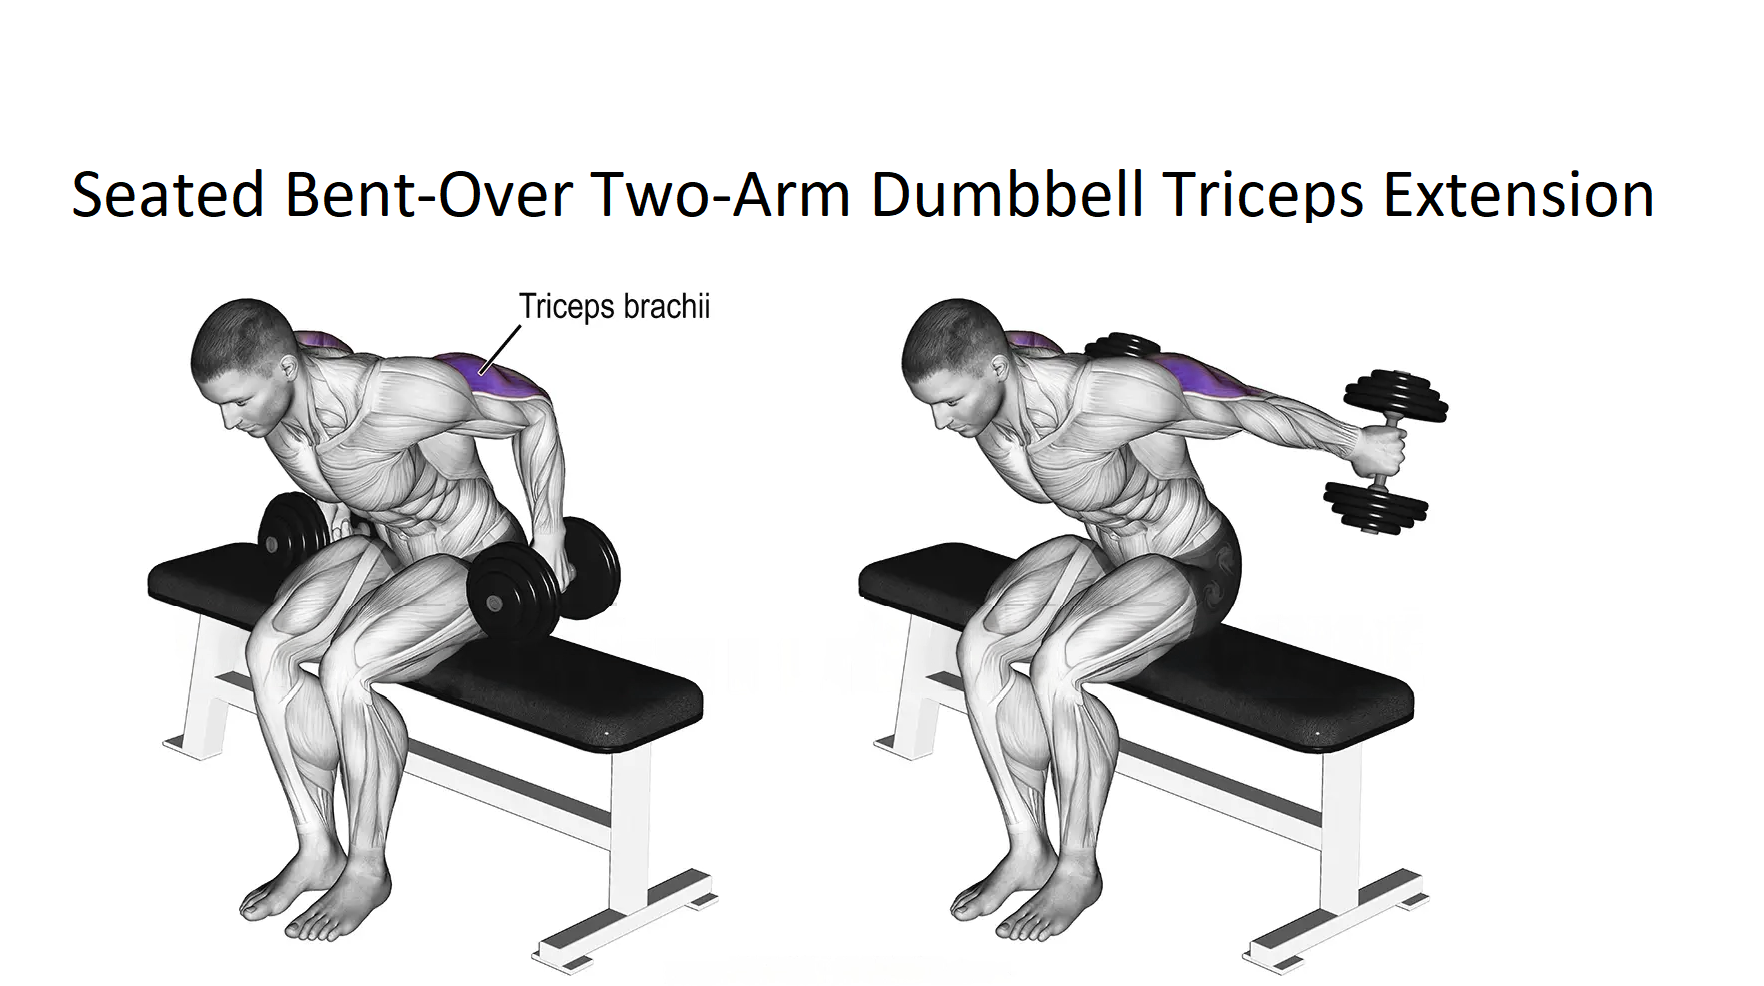 Seated Bent-Over Two-Arm Dumbbell Triceps Extension